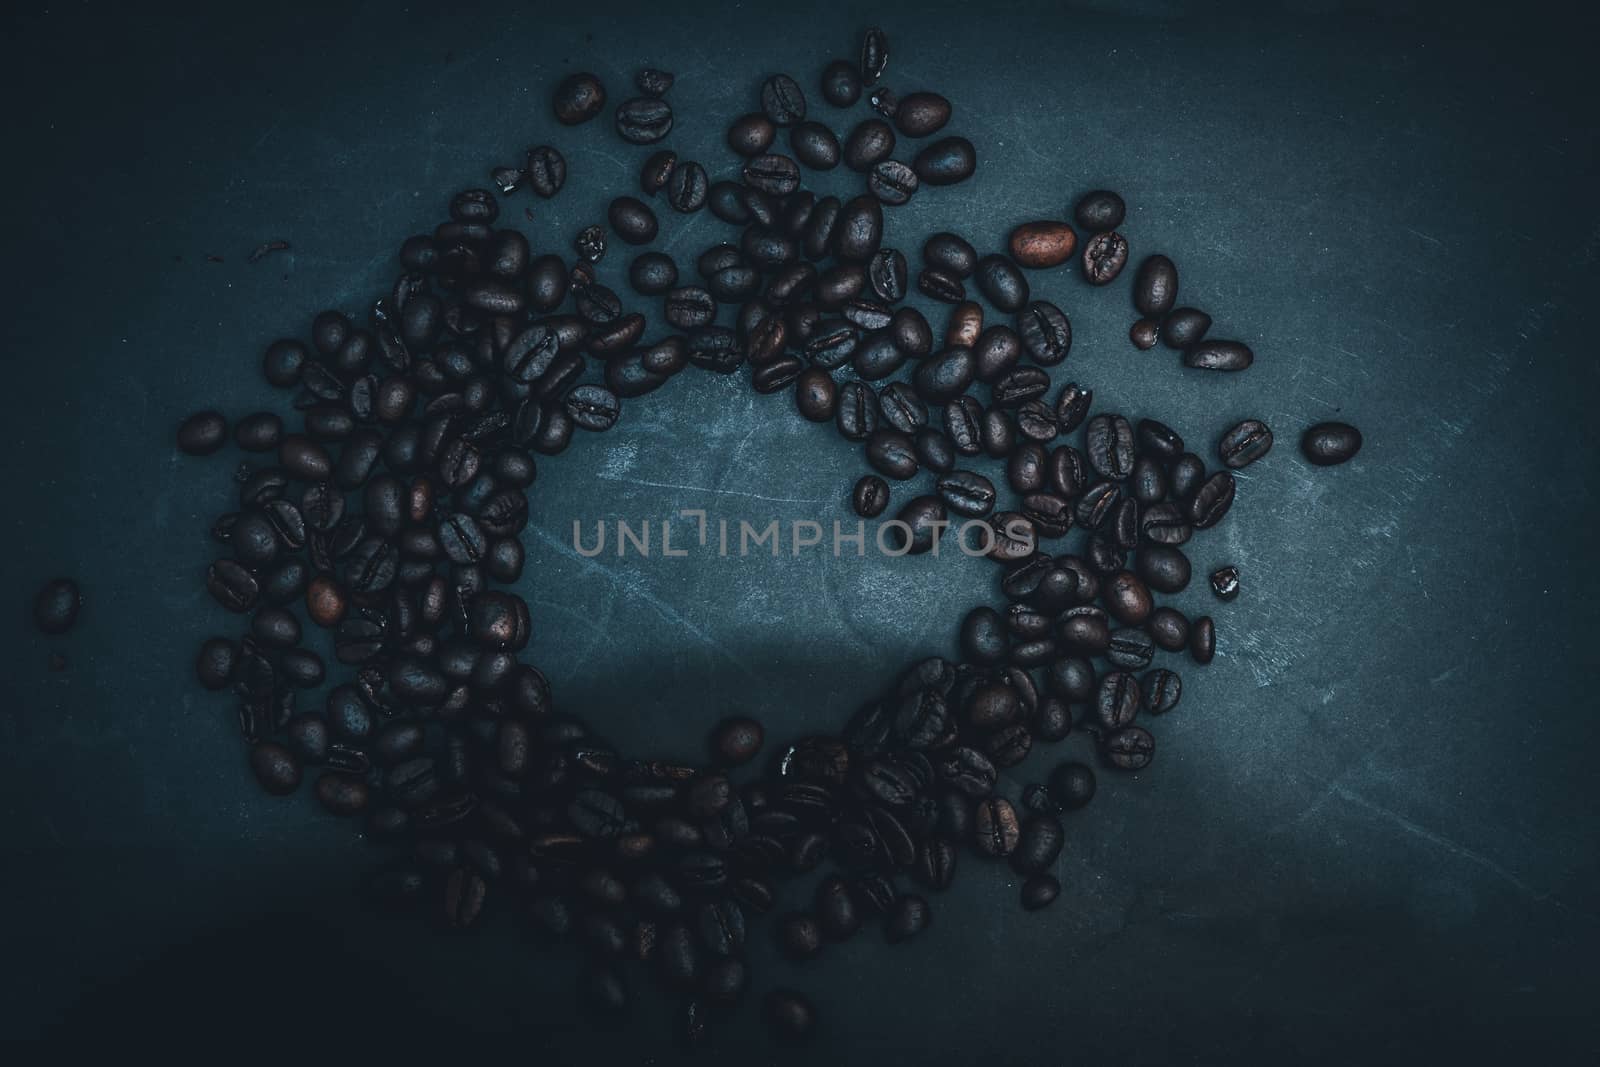 The Top view of coffee beans on dark background, Color retro style, Thailand. Bean, aroma.